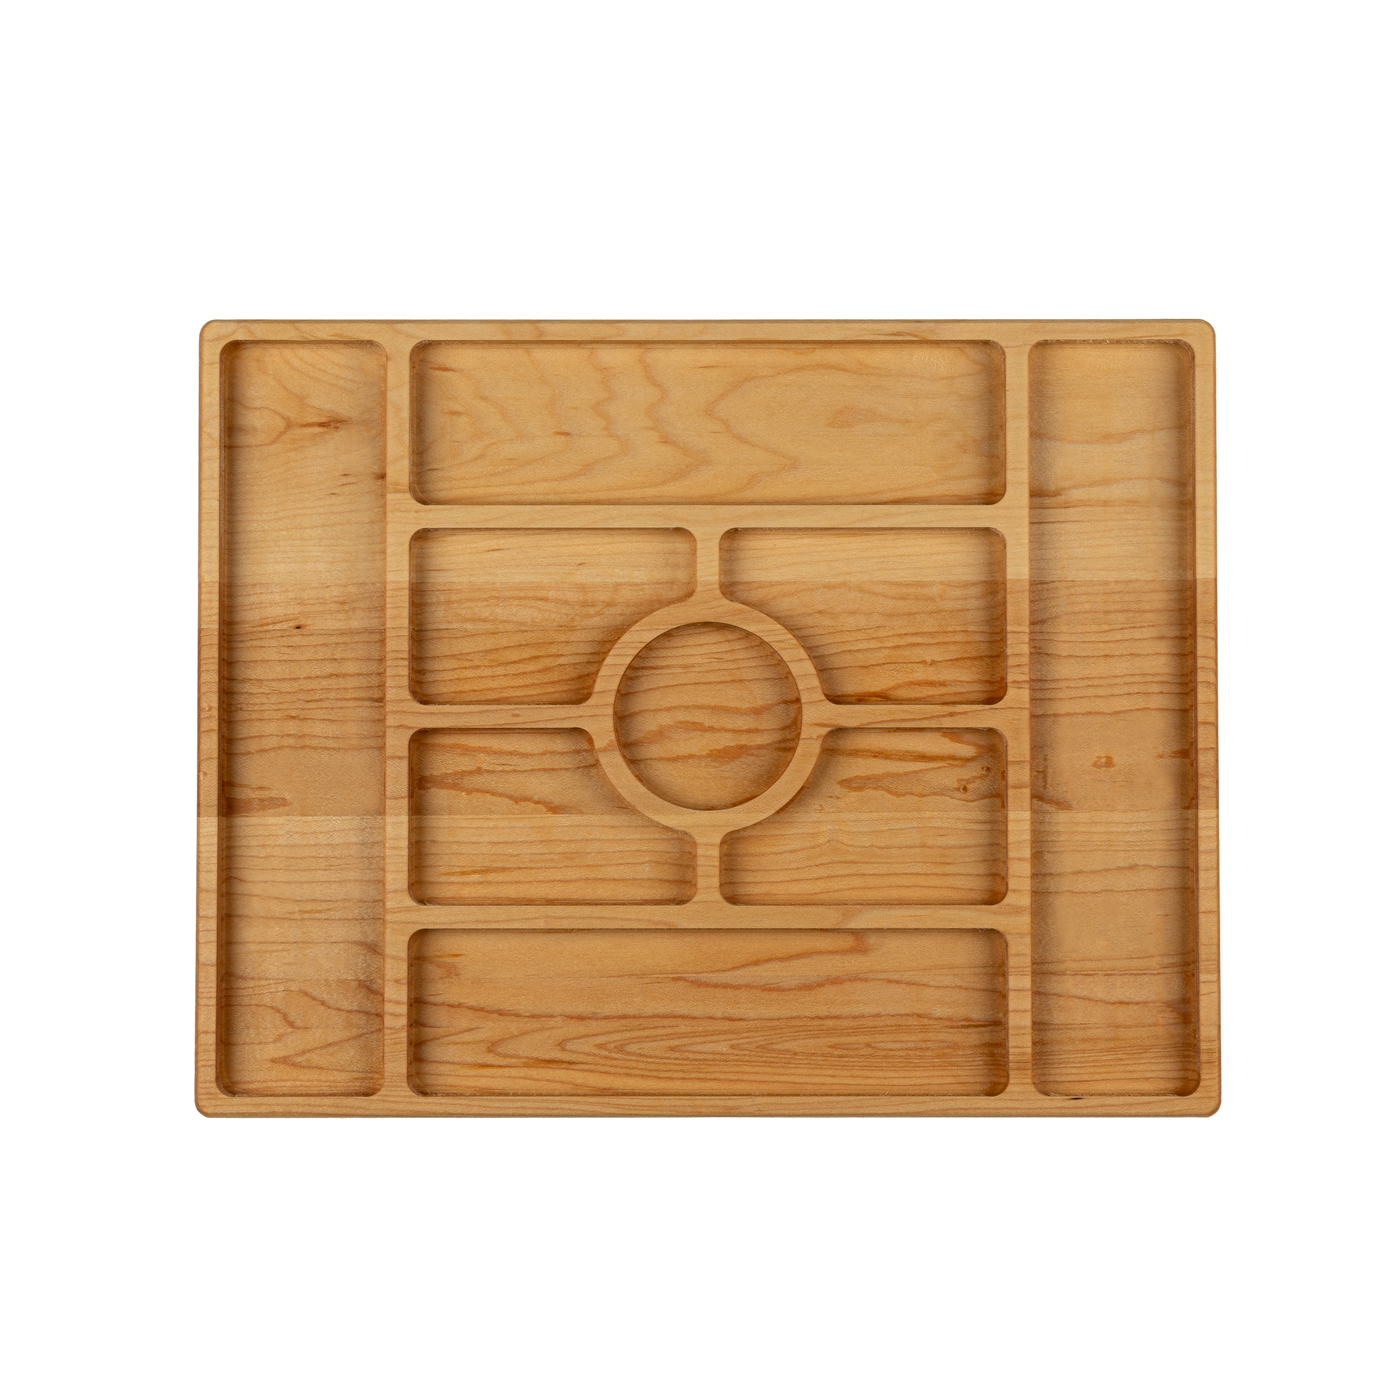 Maple - CHA14 - Charcuterie Board with Compartments 14"x11"x3/4"